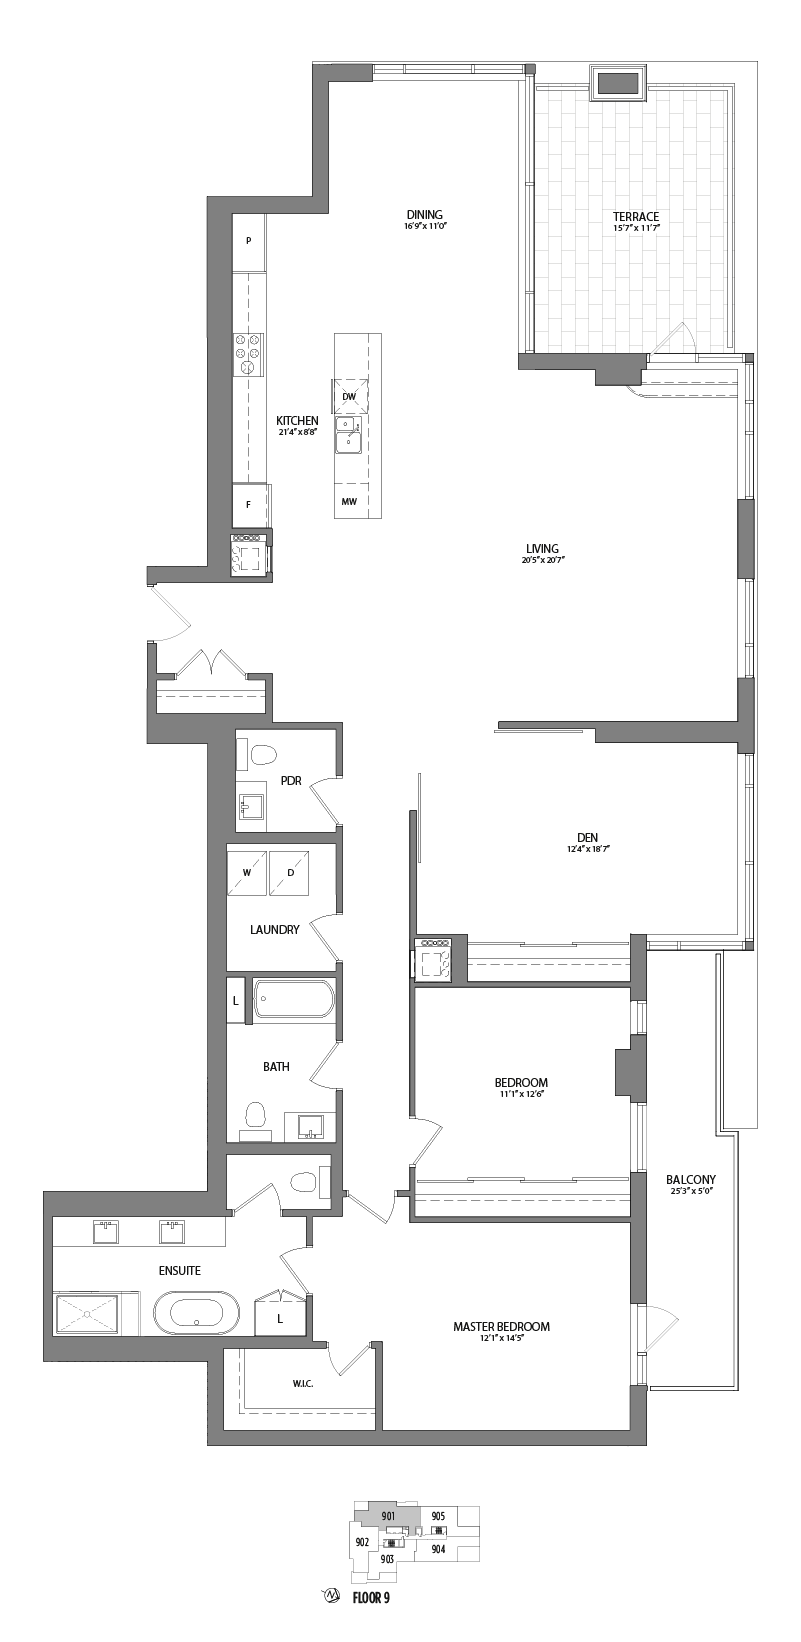 901 Floor Plan of The River Terraces II at Greystone Village with undefined beds